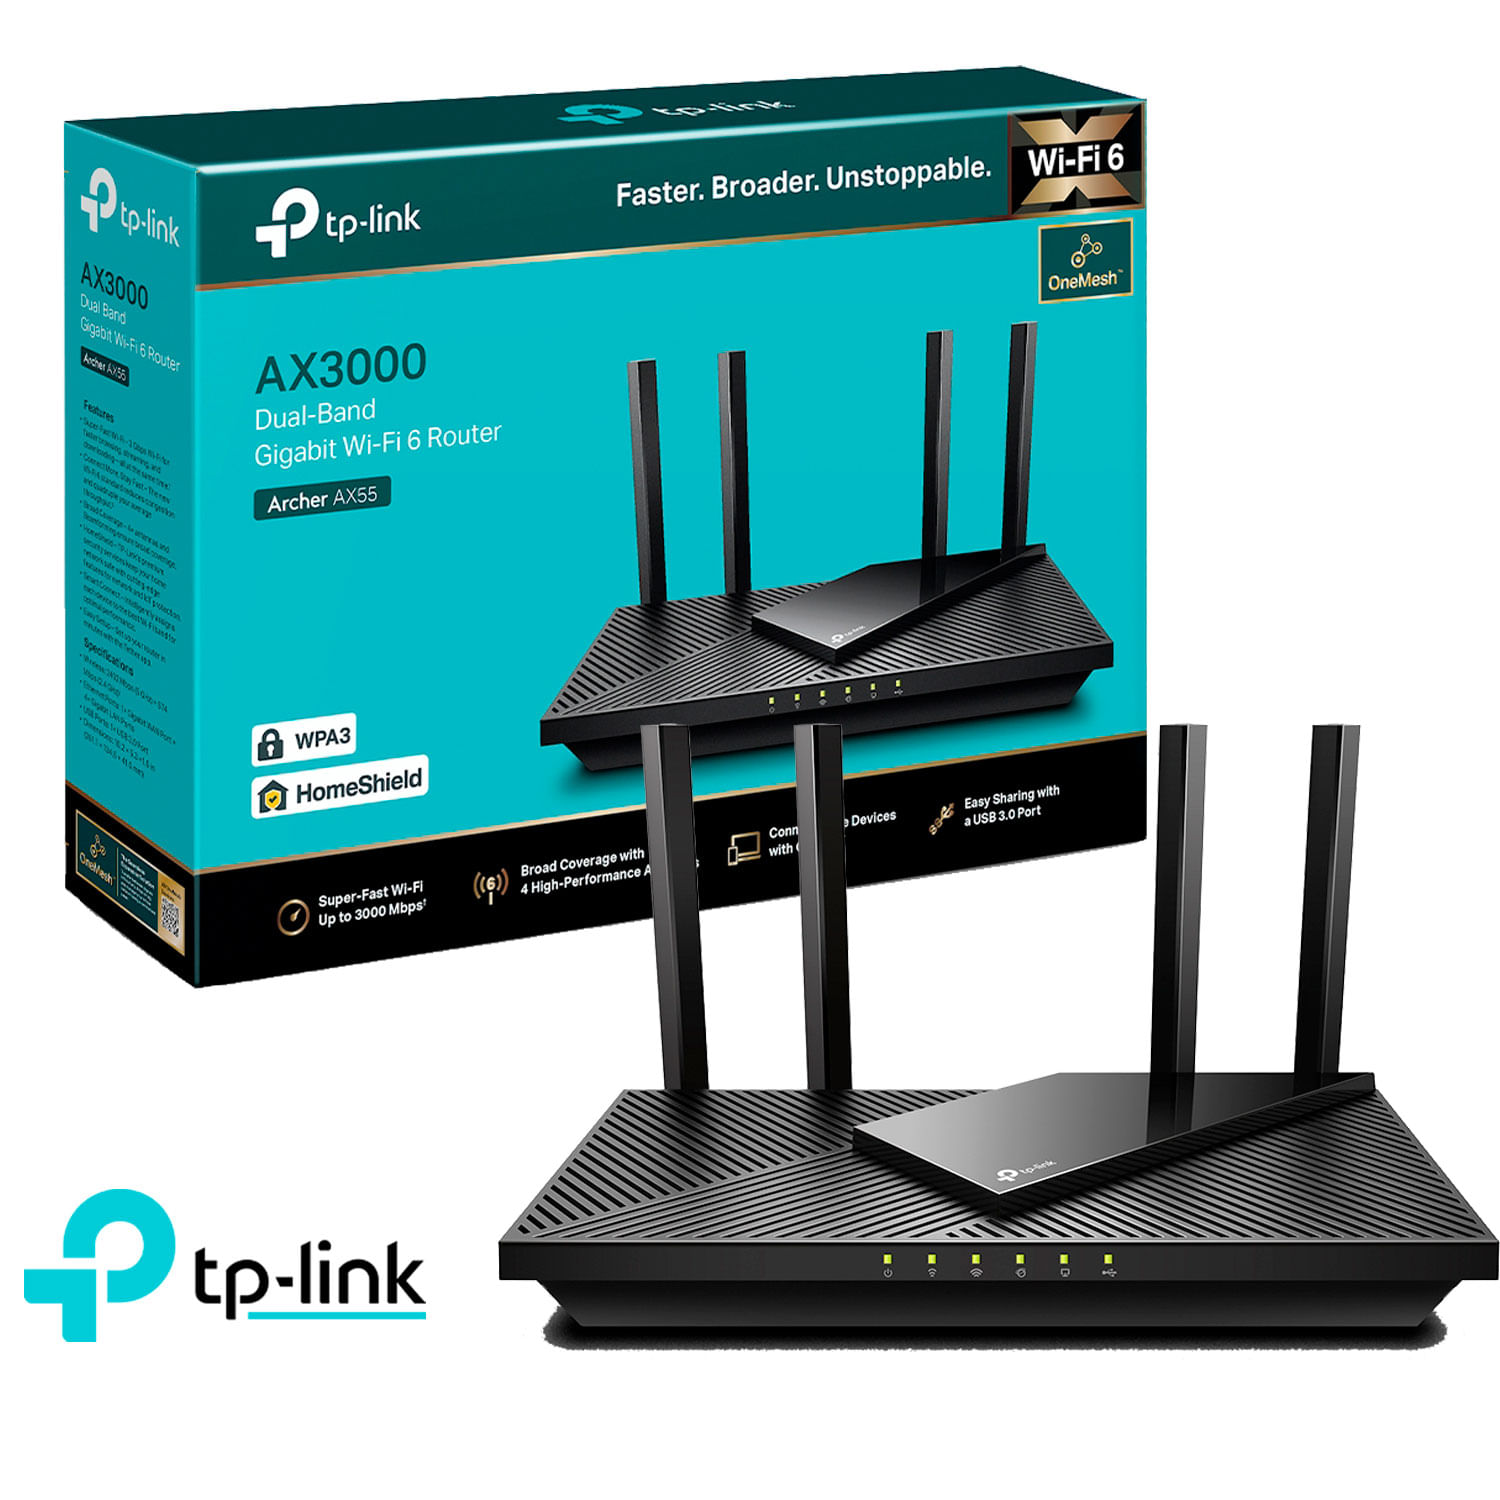 TP Link Archer AX55 WiFi 6 Router Dual Band AX3000